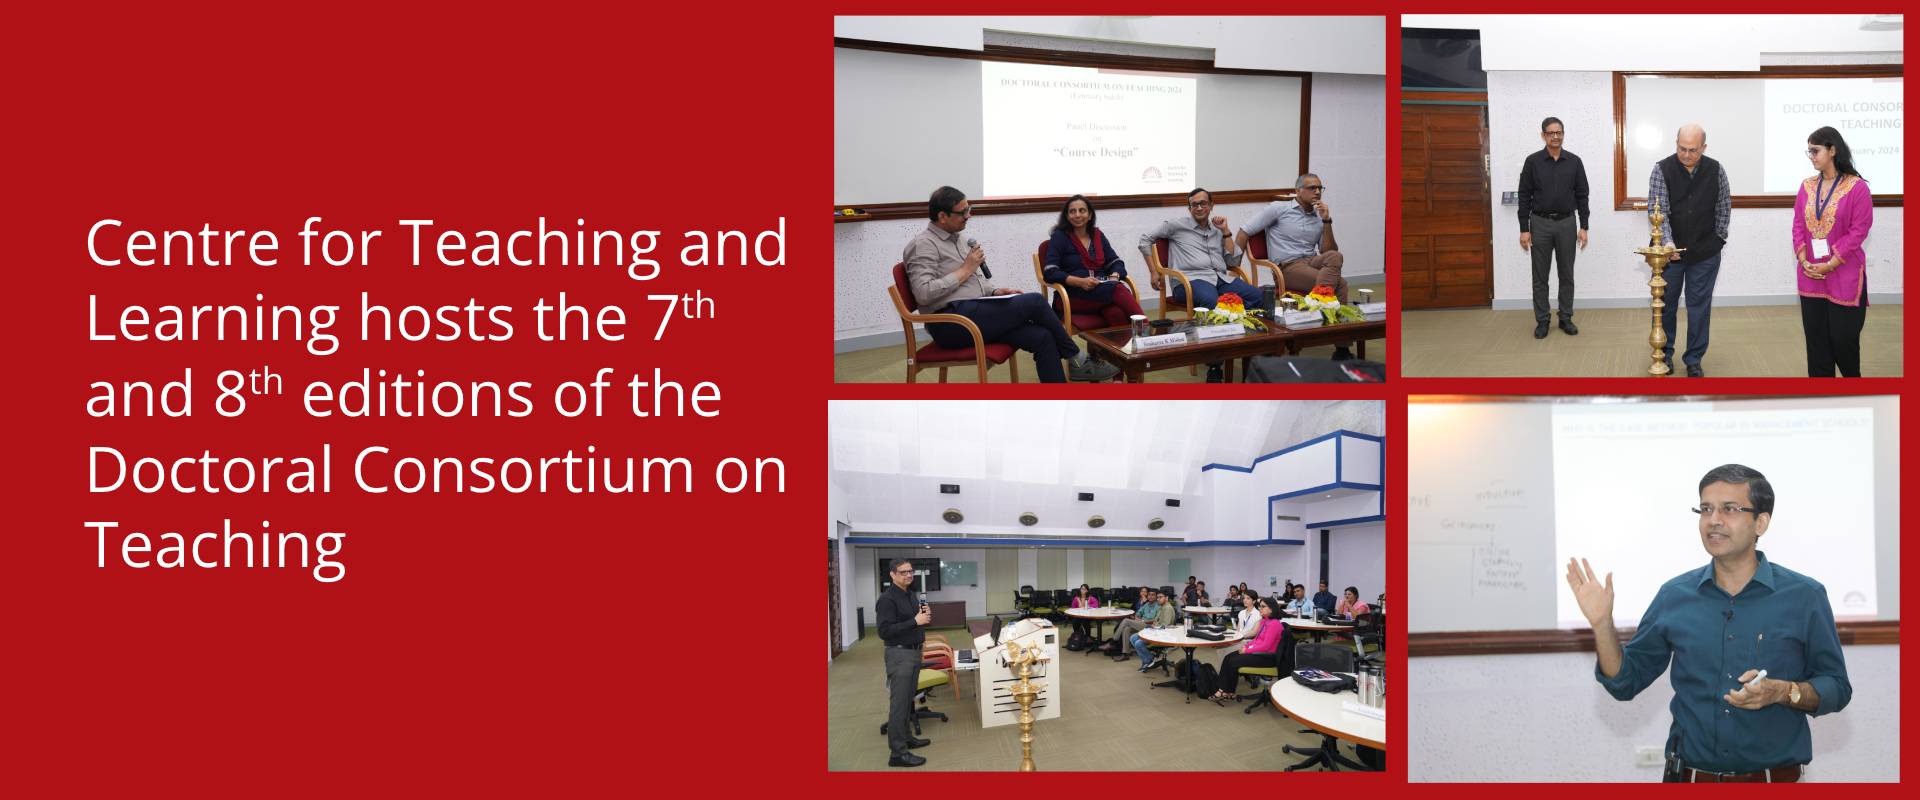 Centre for Teaching and Learning hosts the 7th and 8th editions of the Doctoral Consortium on Teaching 